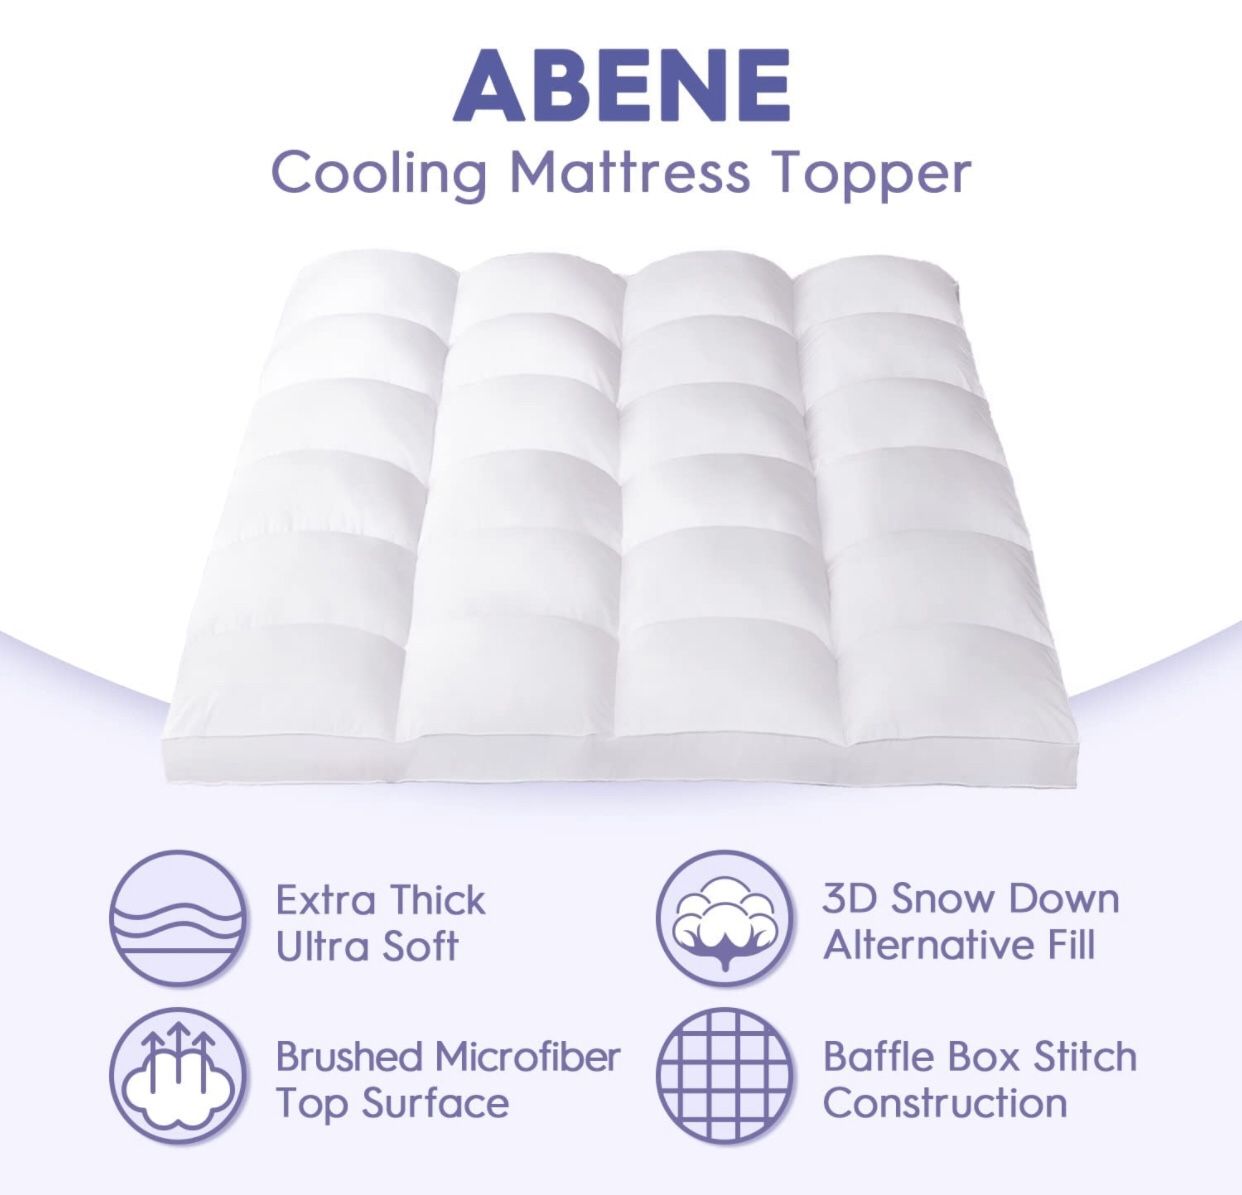 King Bed Matters Topper (Brand New)